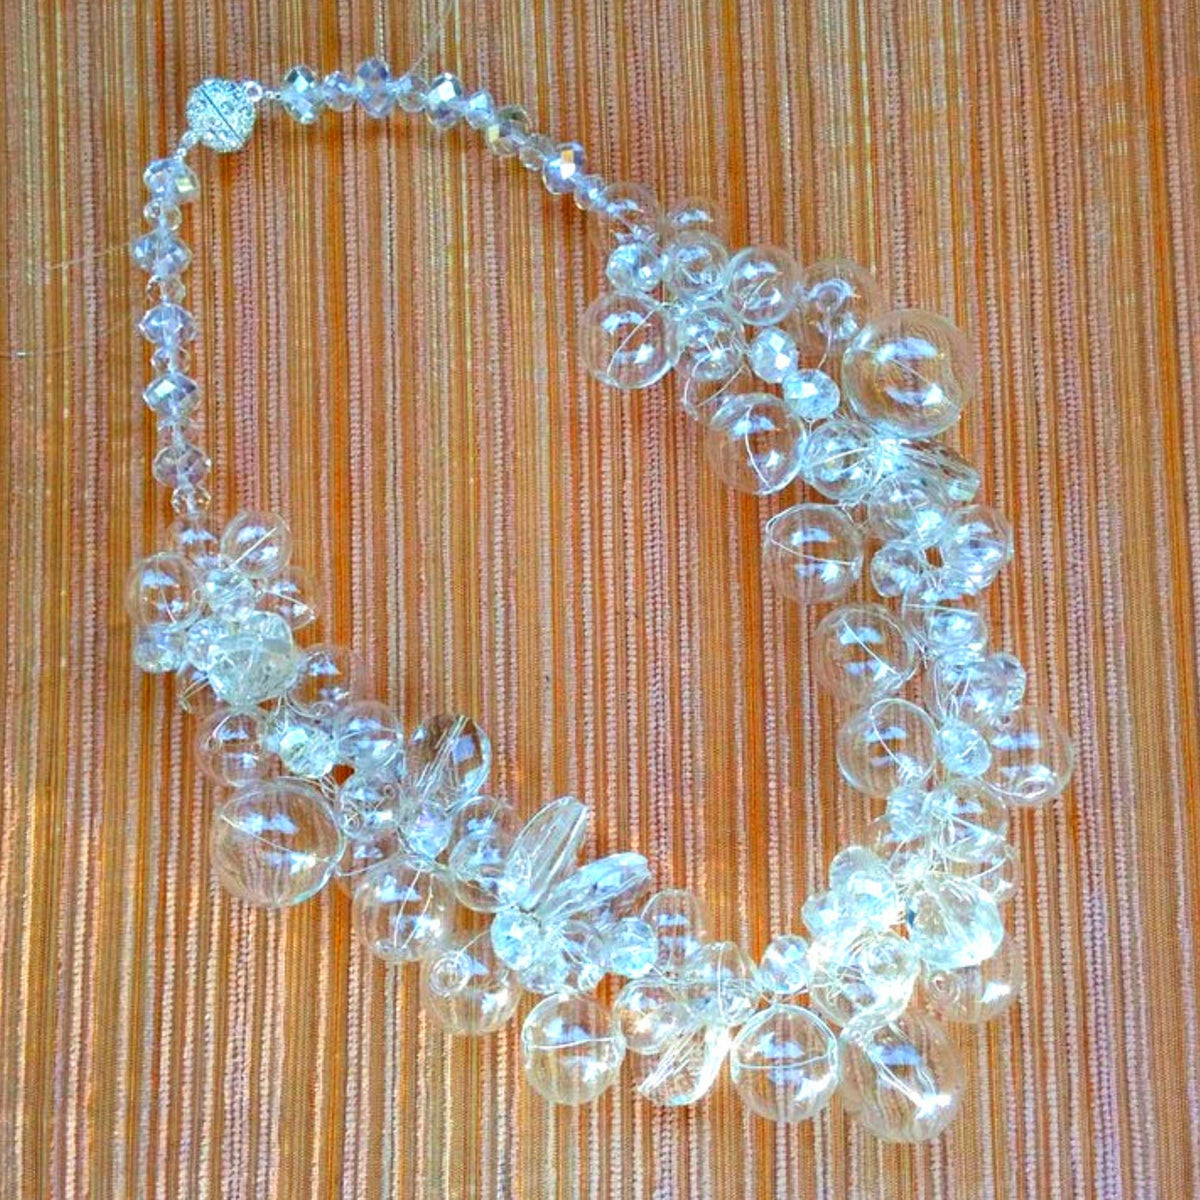 Bridal Hand Blown Glass and Crystal Statement Necklace - Chanel in Bubbles!